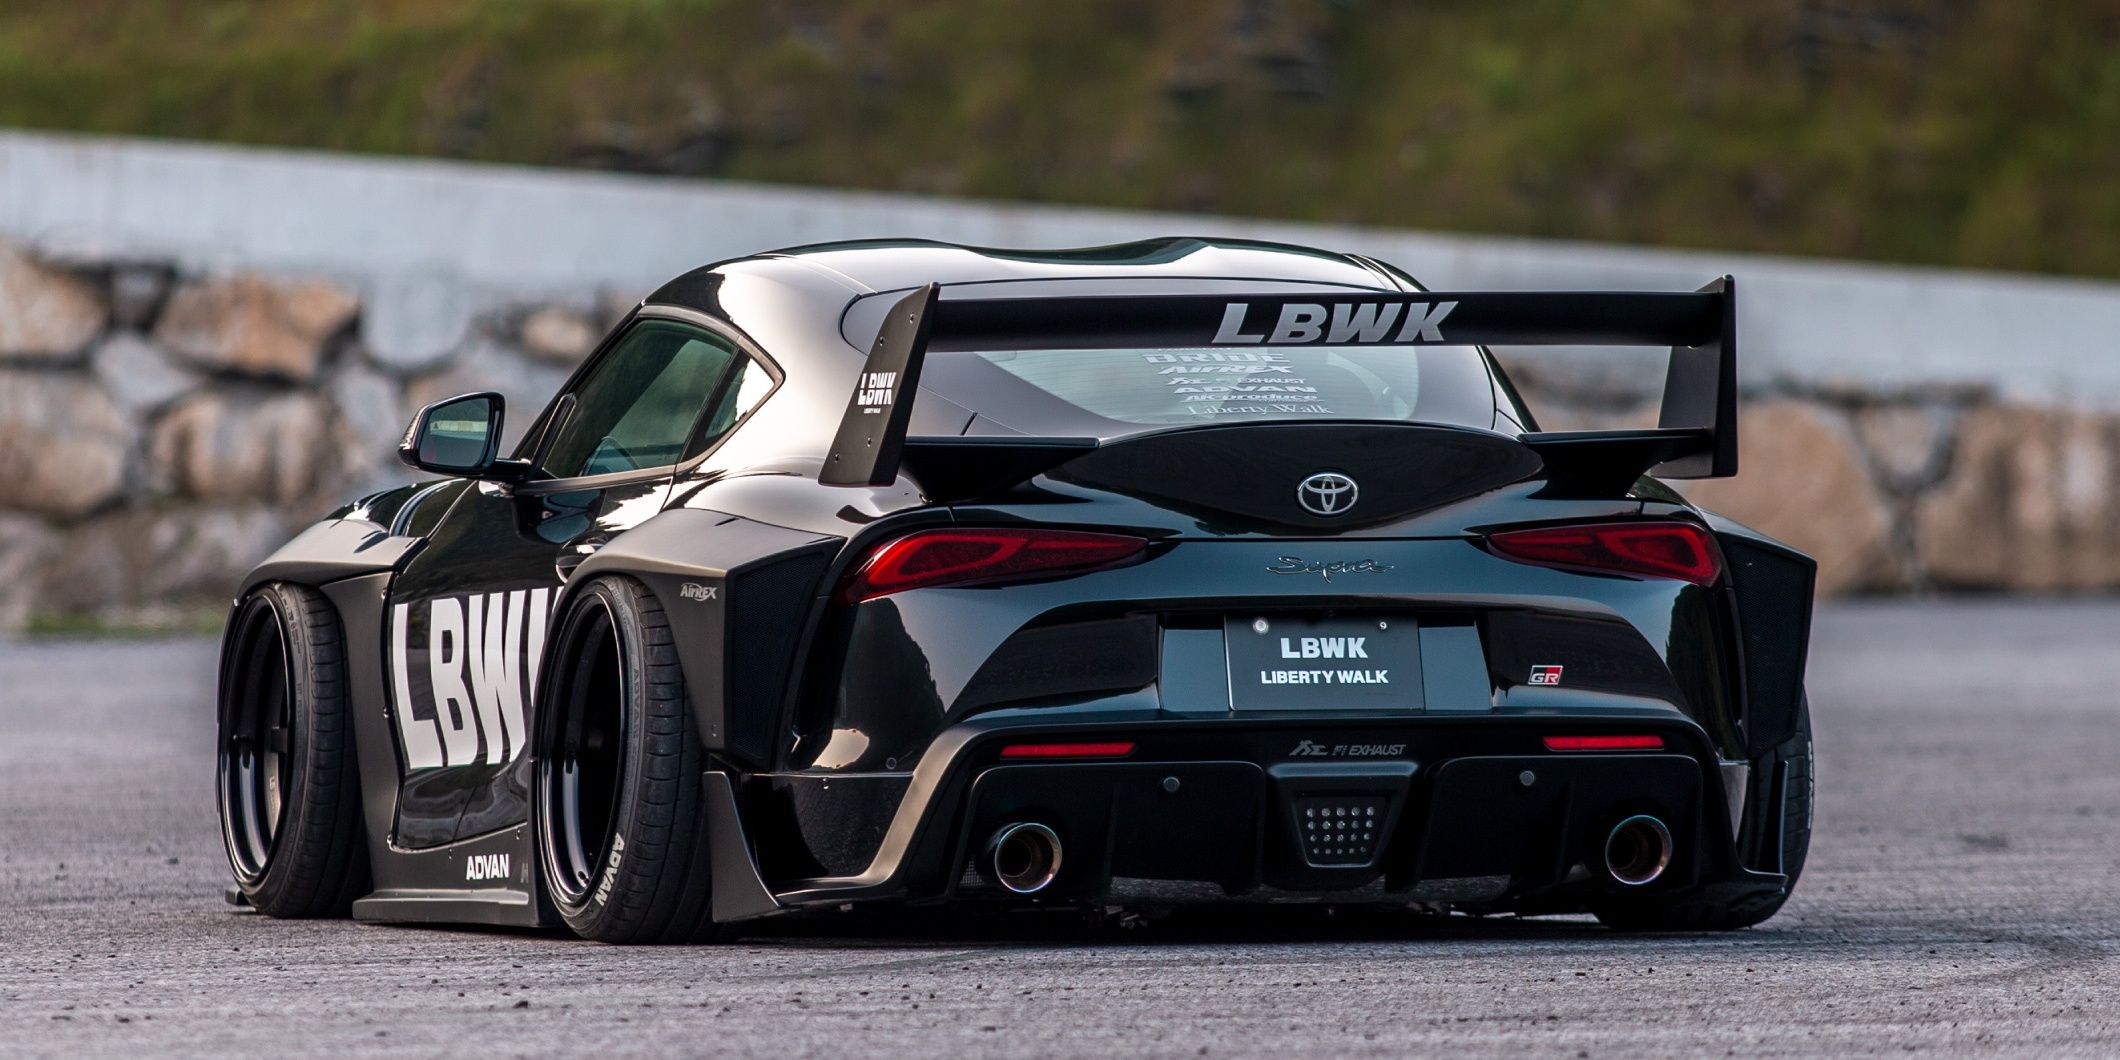 5 Wildest Body Kits From Liberty Walk And 5 From Rocket Bunny